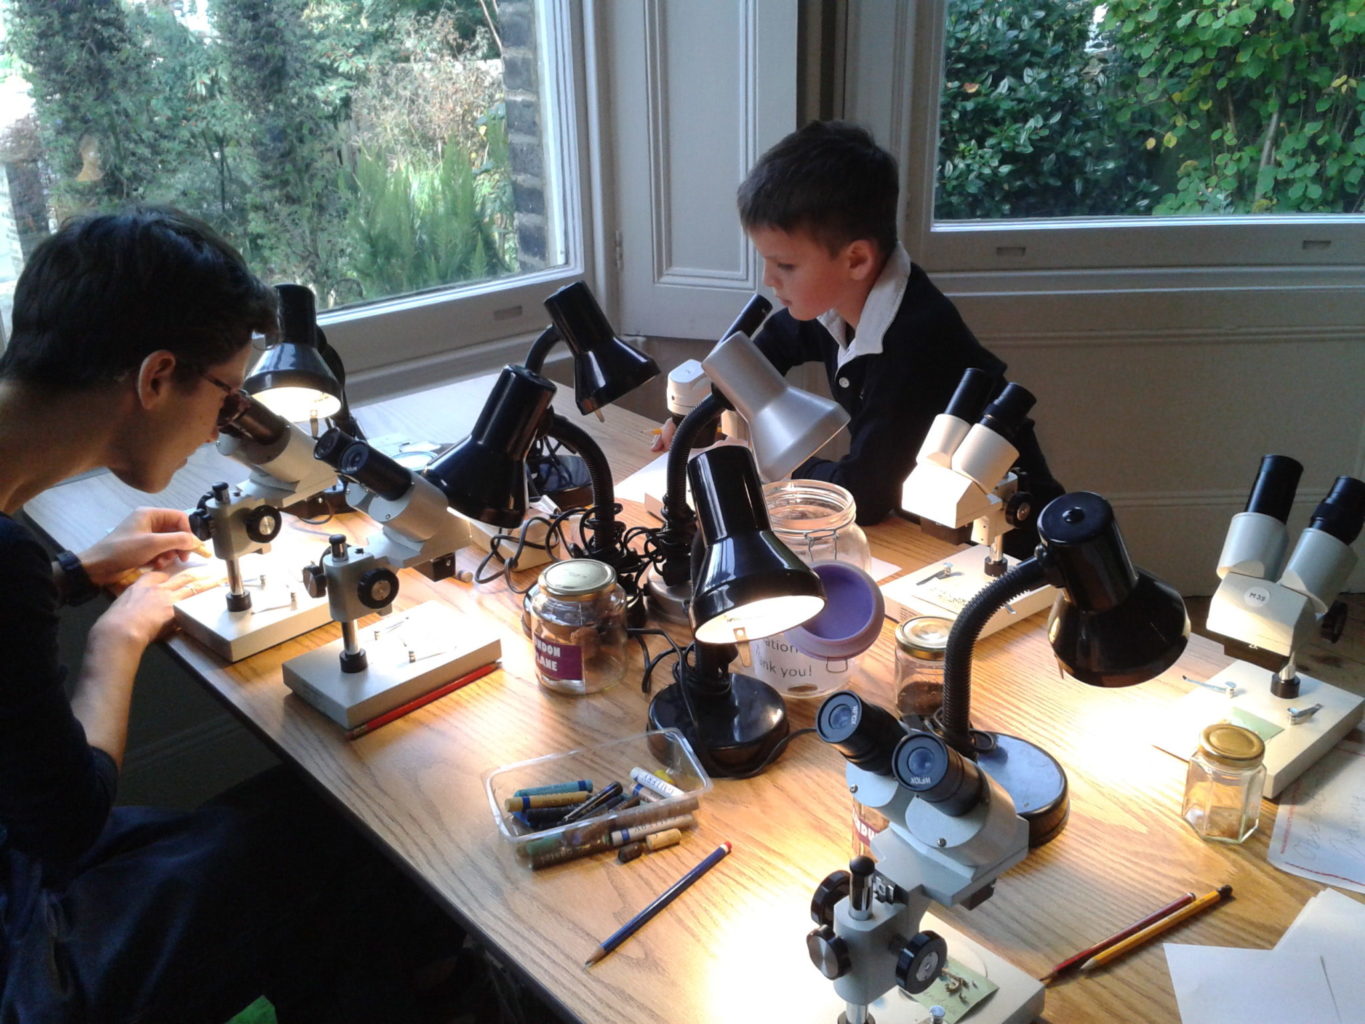 Open Morning with Microscopes